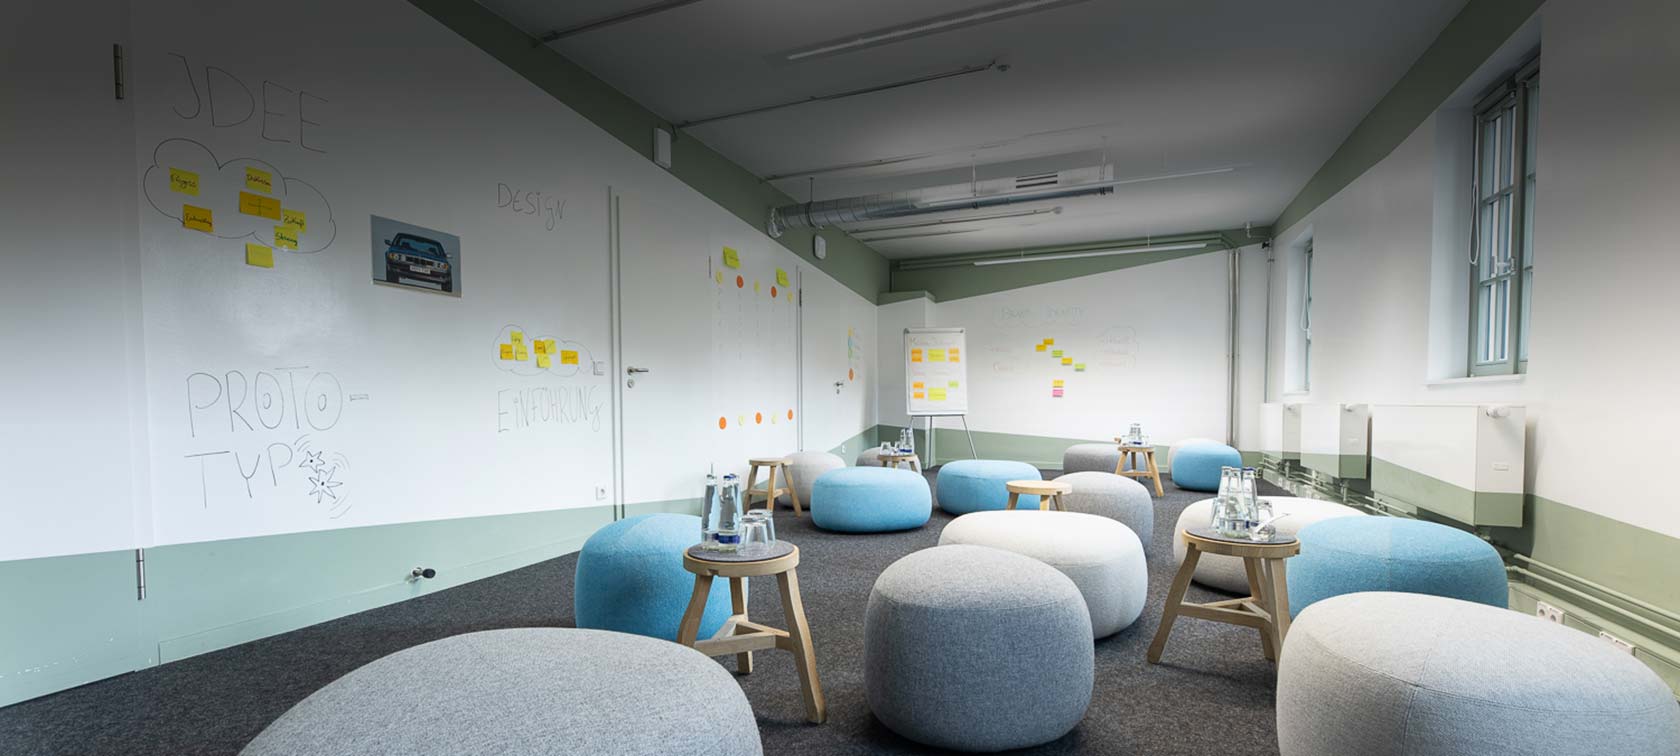 BMW Group Classic workshop room with seating and whiteboards for creative work